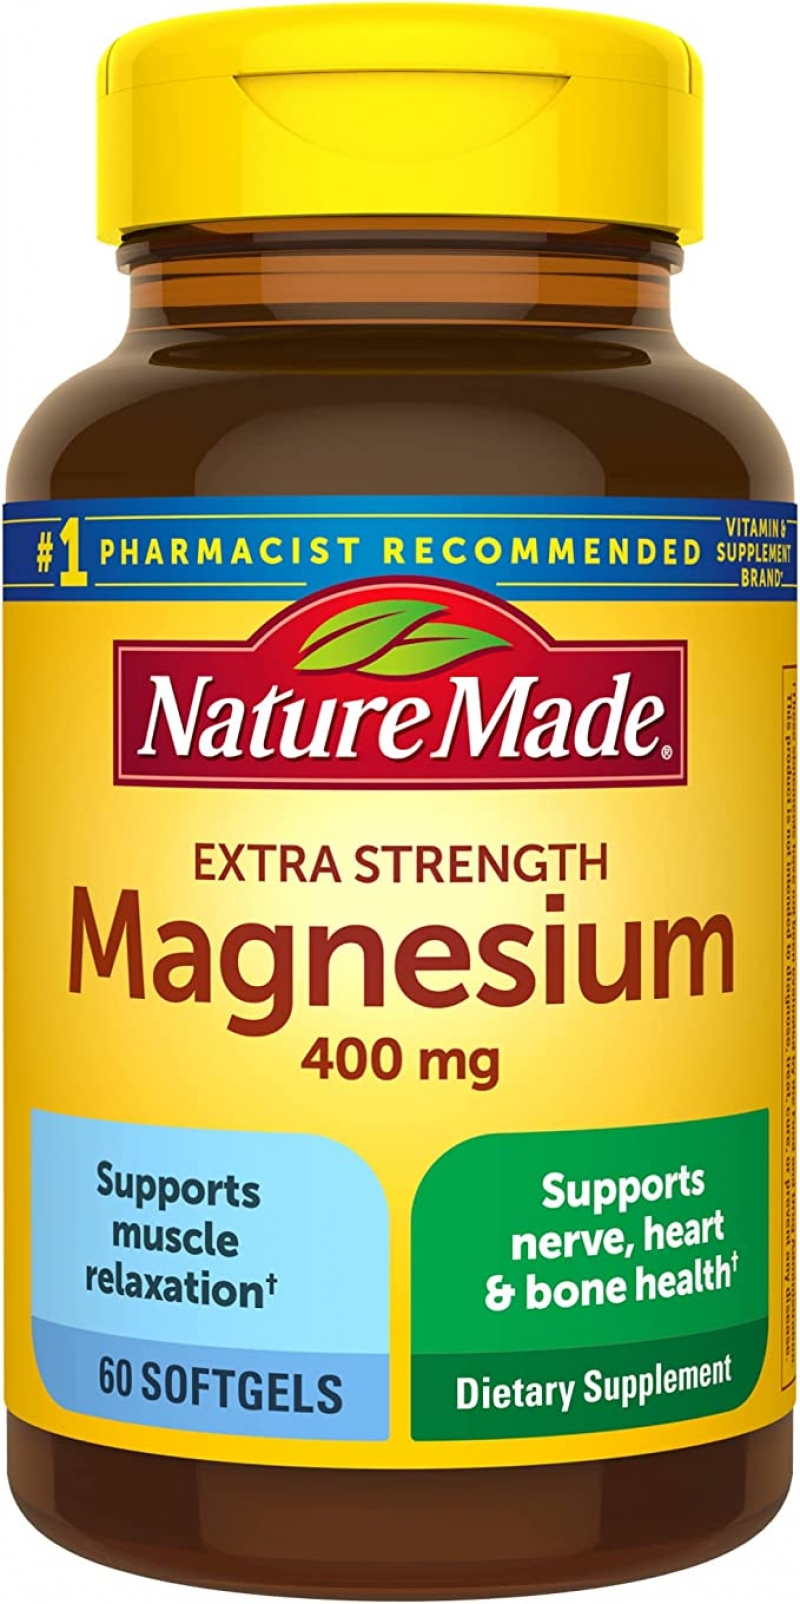 ihocon: Nature Made Extra Strength Magnesium Oxide 400 mg, Dietary Supplement for Muscle Support, 60 Softgels 氧化鎂(鎂錠)